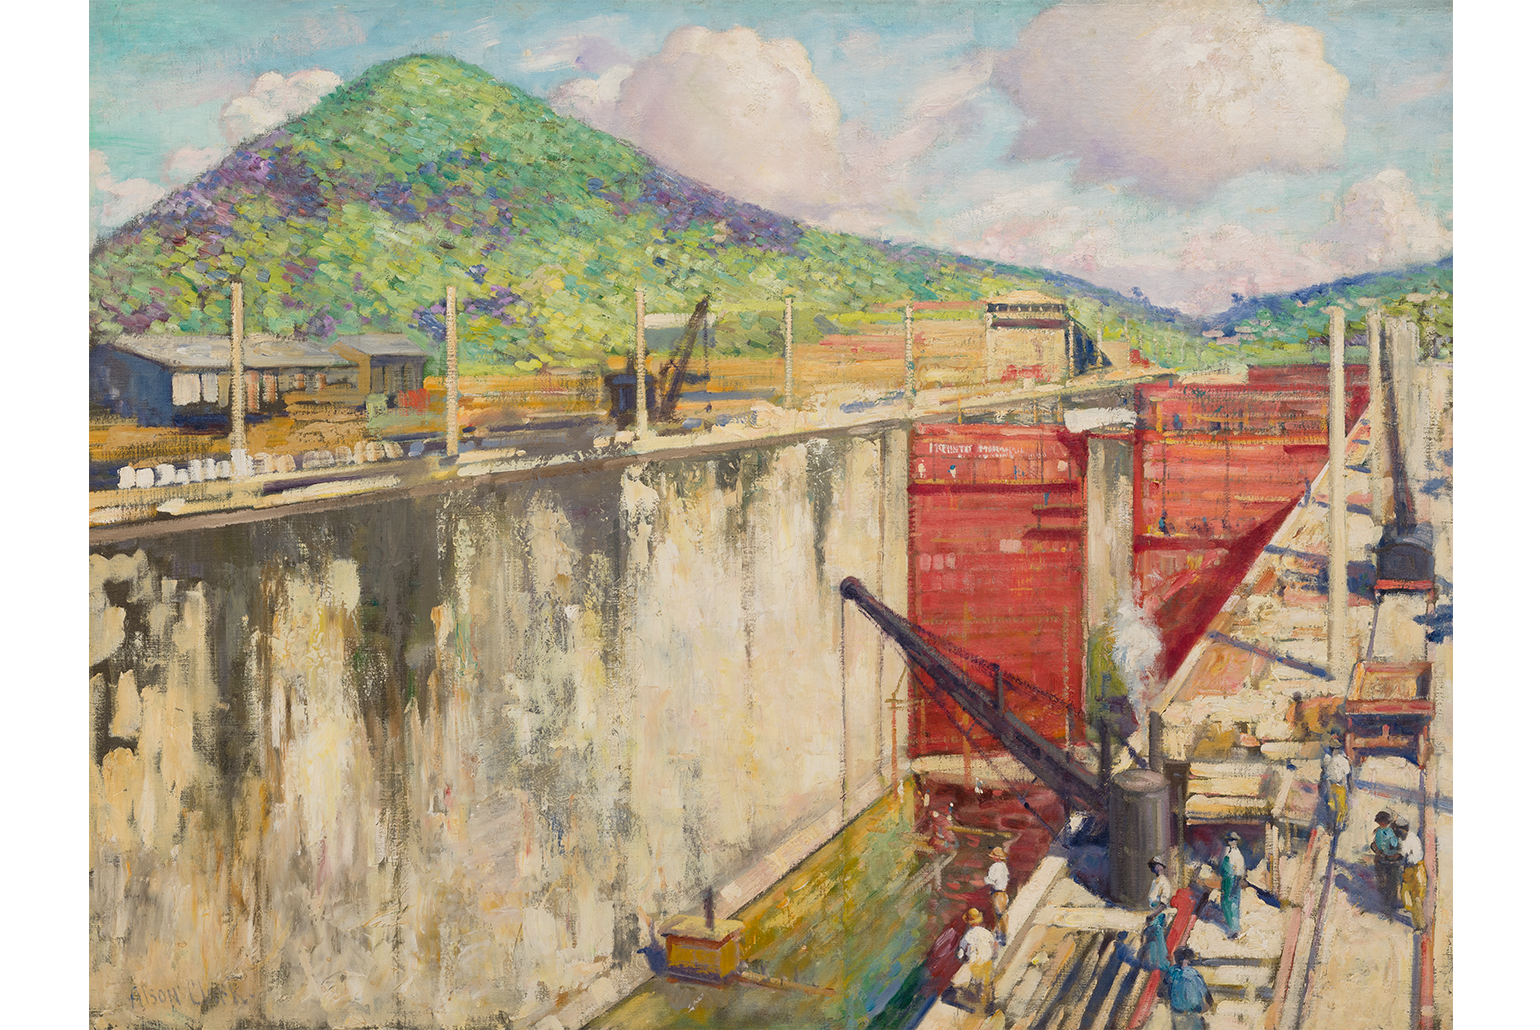 Alson Skinner Clark, "Pedro Miguel Locks," 1913, Oil on canvas, 38 x 50 in. The Buck Collection at UCI Jack and Shanaz Institute and Museum of California Art